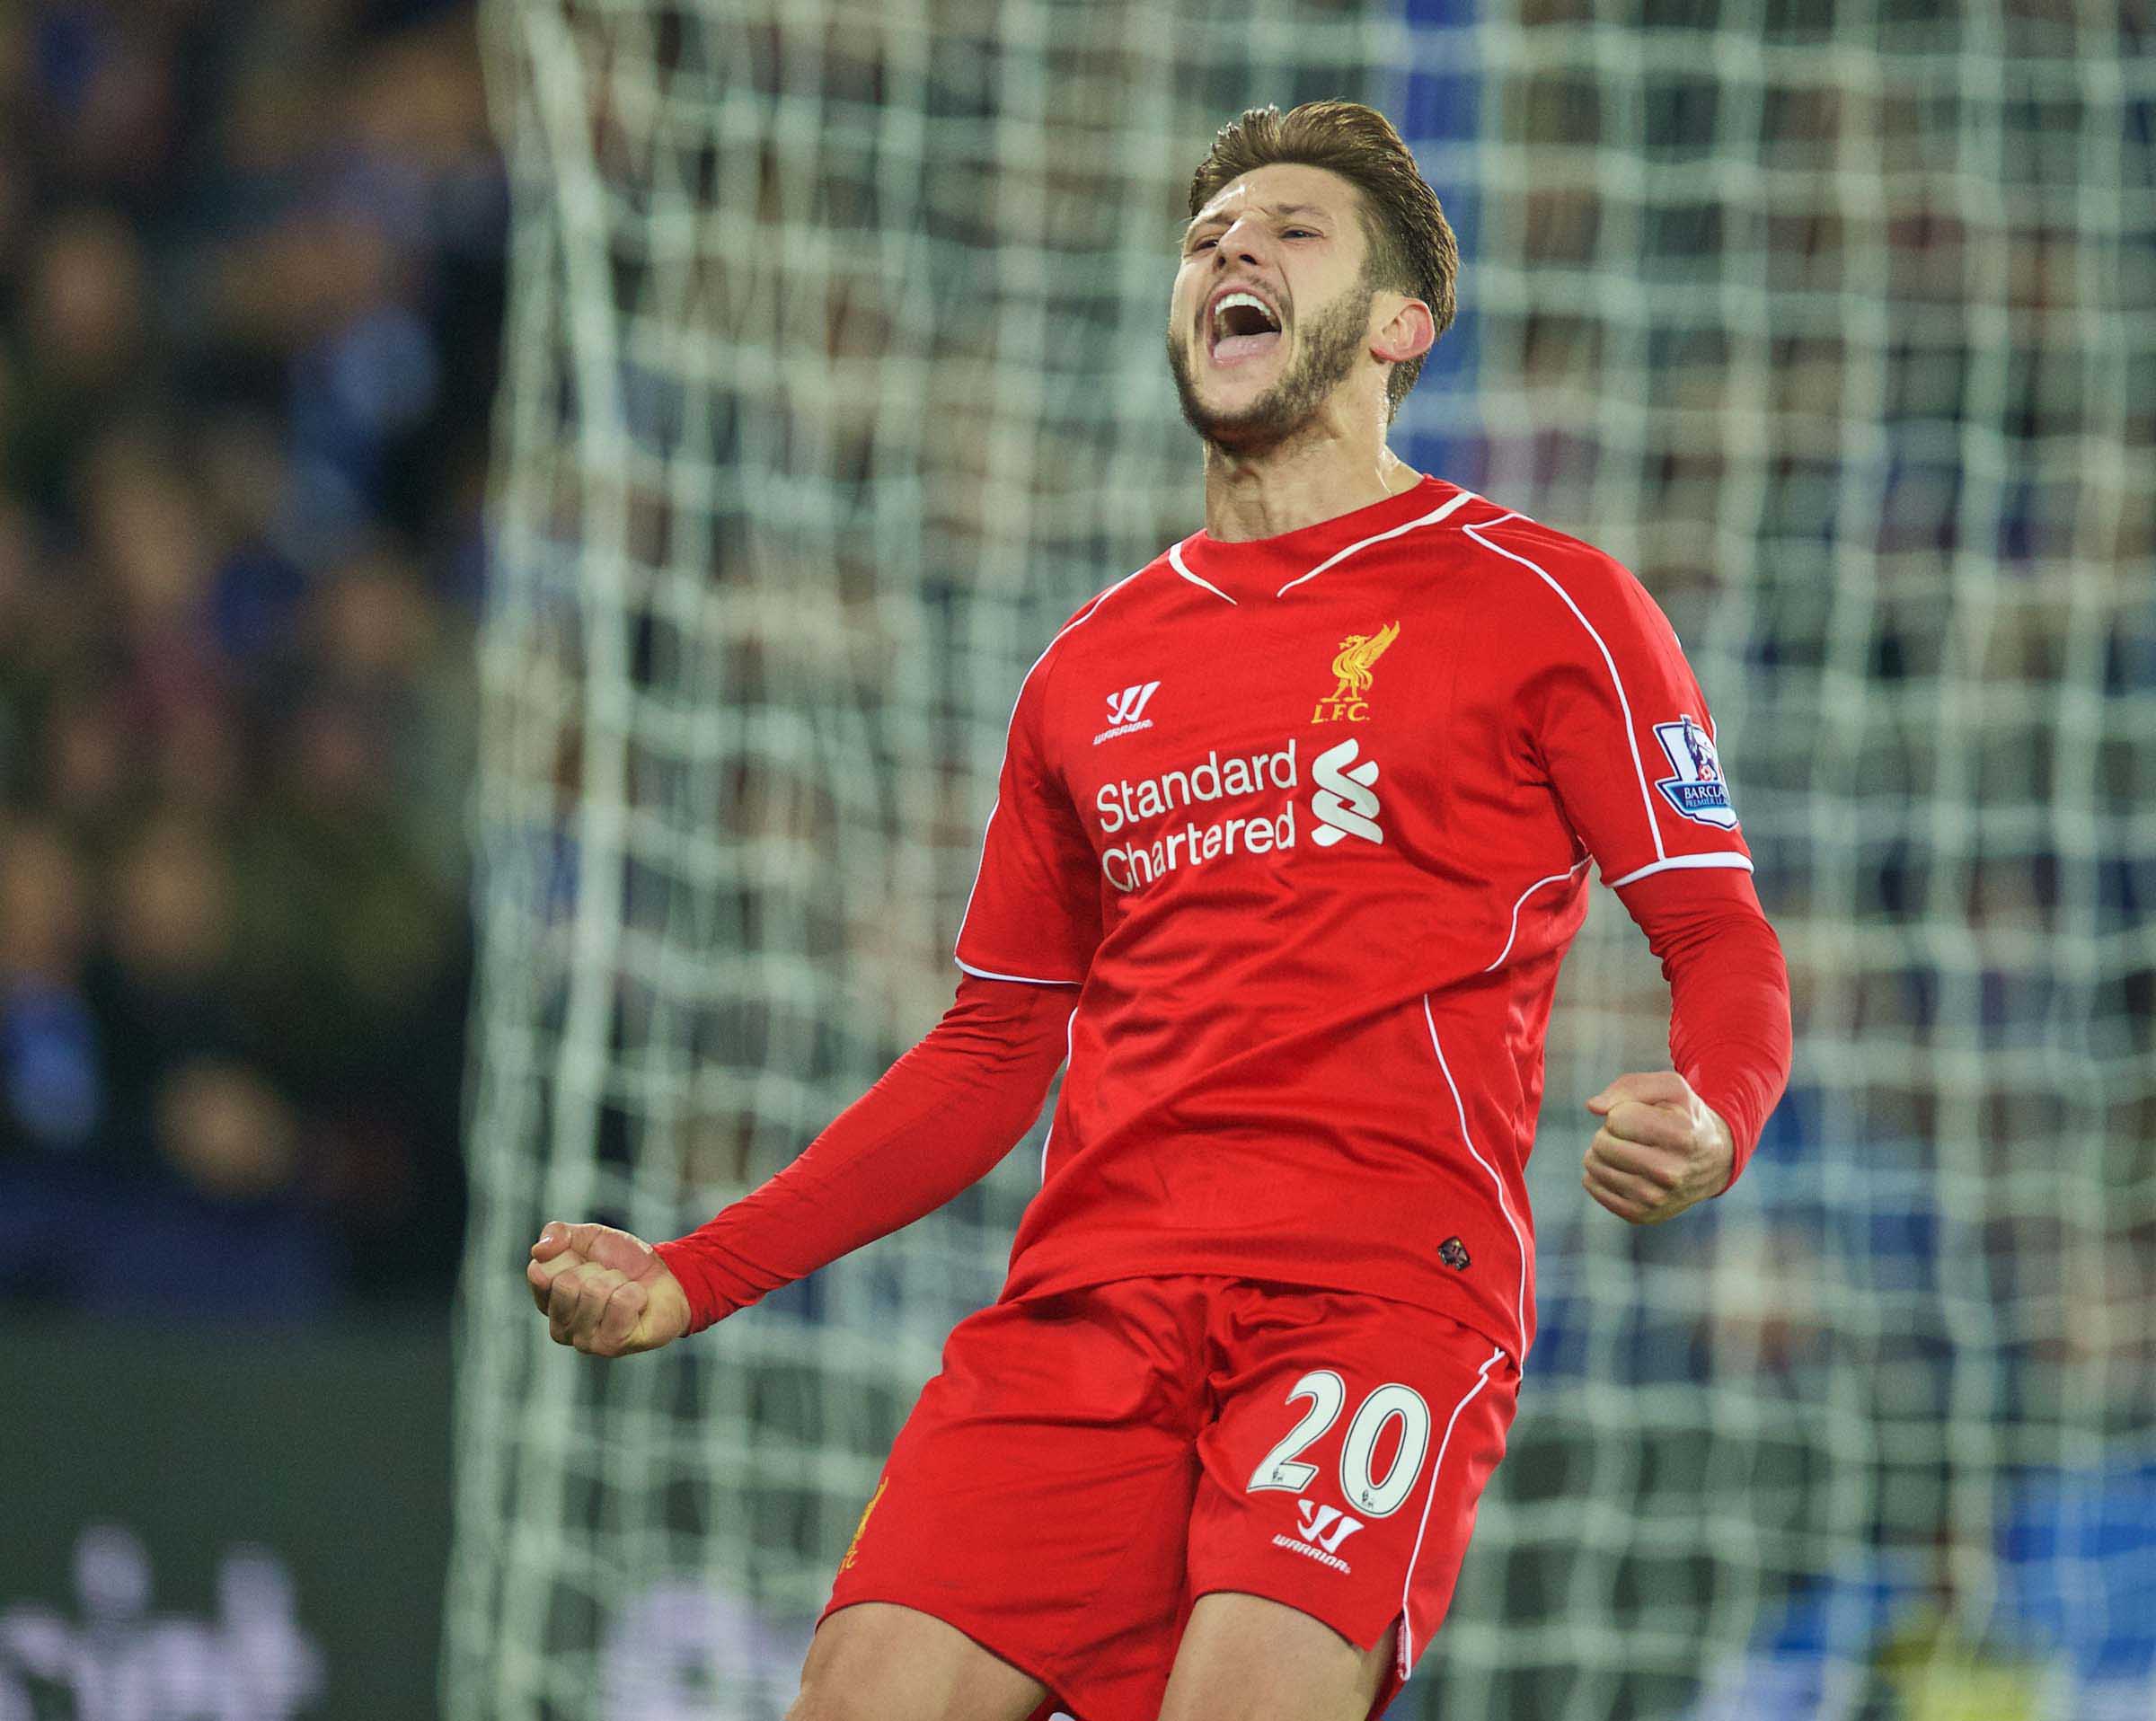 NEIL ATKINSON’S MATCH REVIEW: LEICESTER CITY 1 LIVERPOOL 3